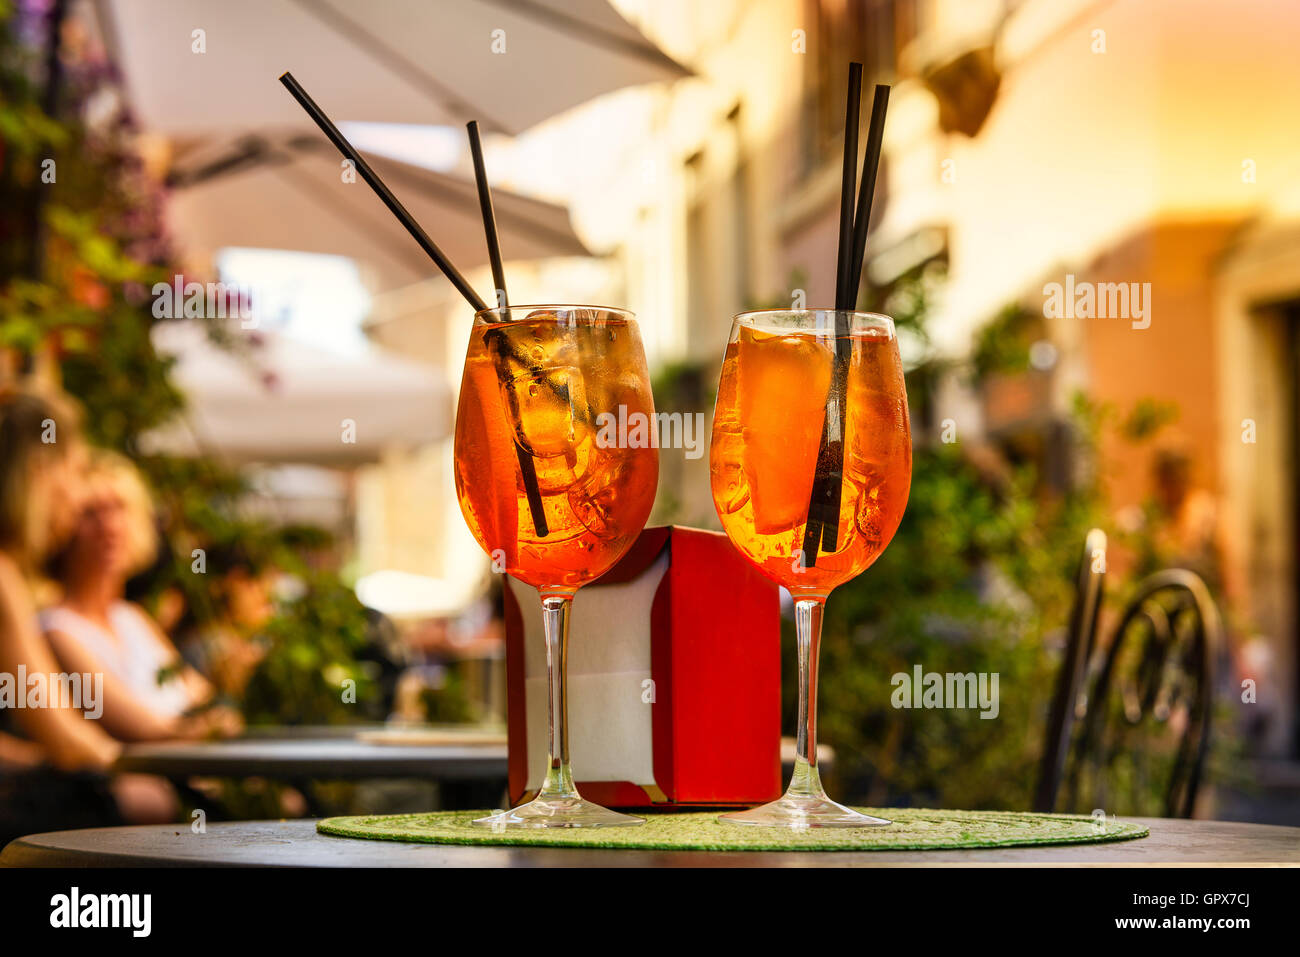 Aperol Spritz Cocktail. Alcoholic beverage based on table with ice cubes and oranges. Stock Photo